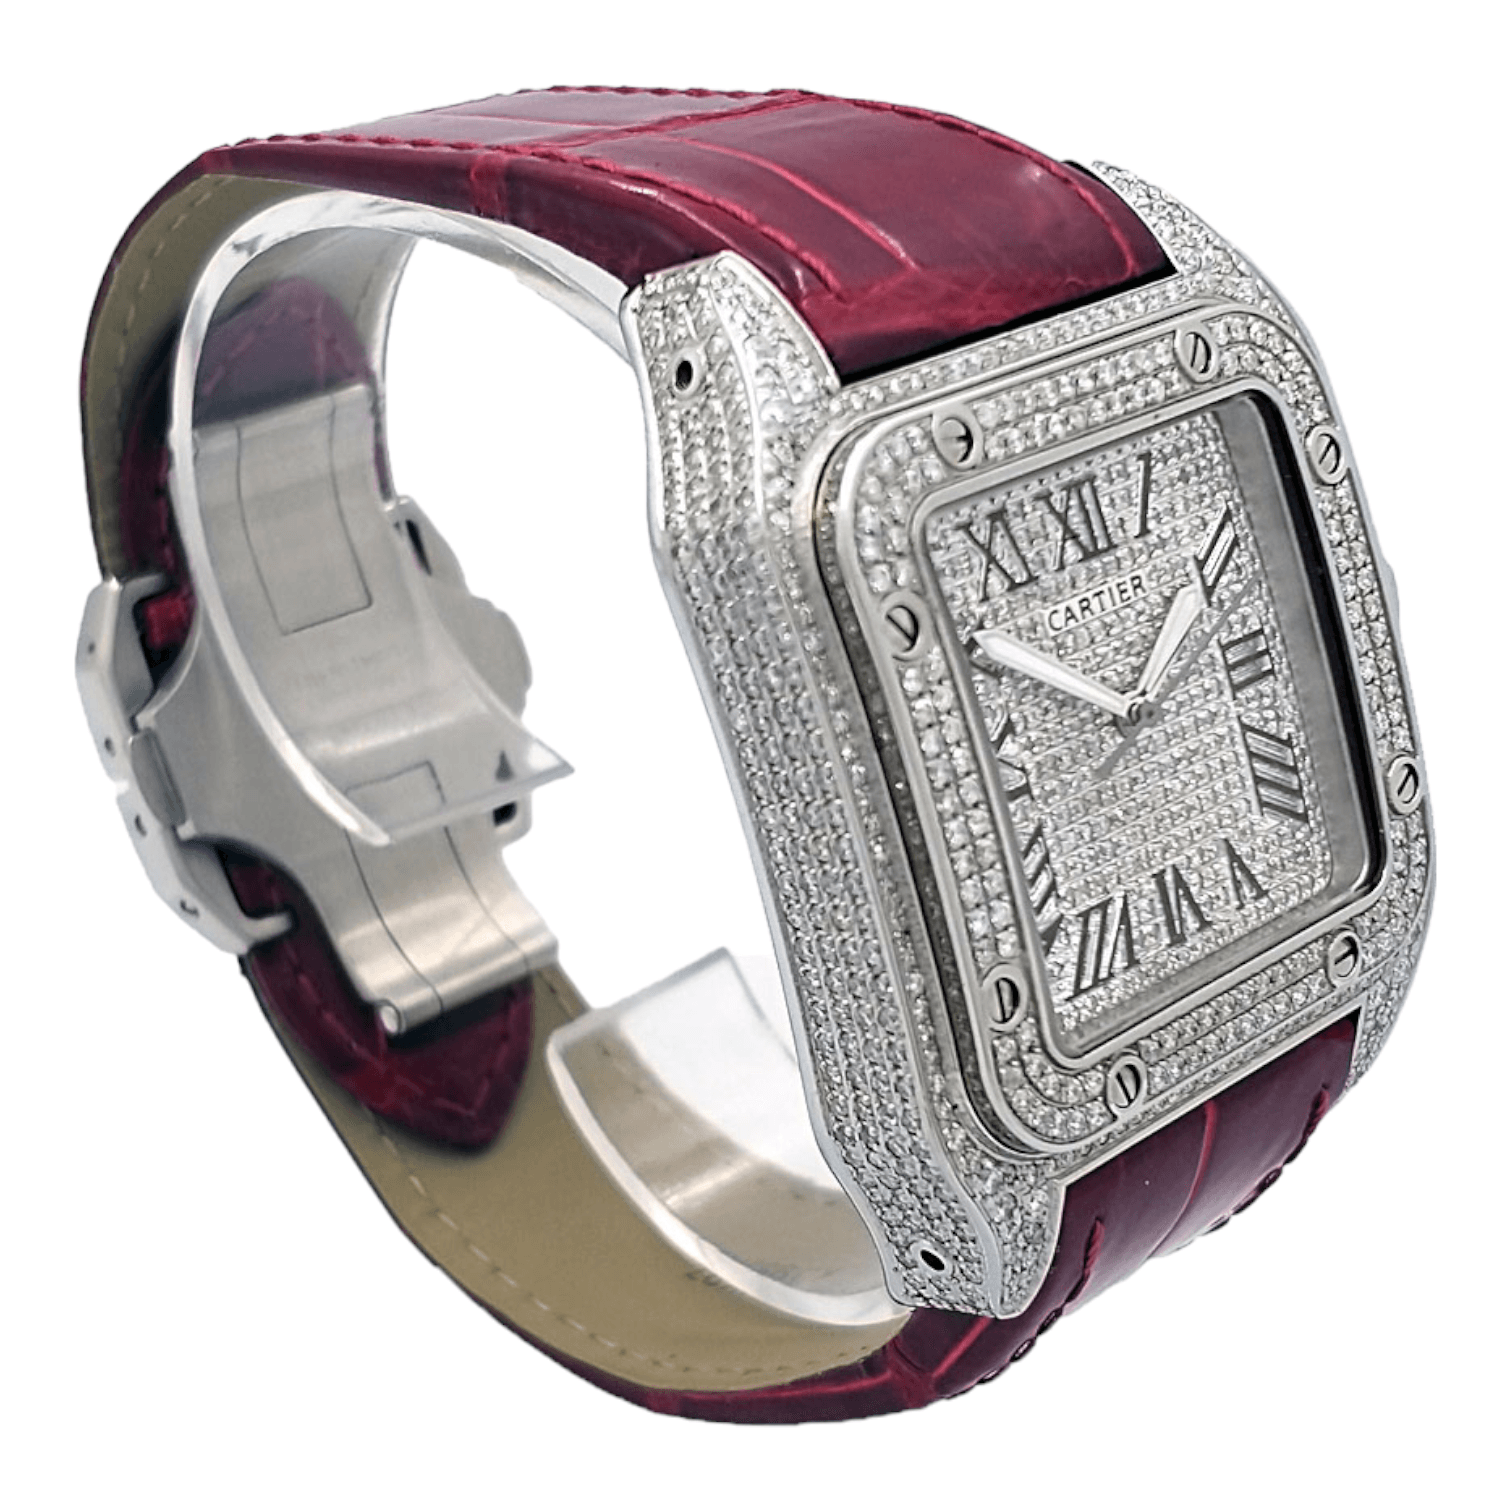 Cartier Santos 100 XL Iced Out diamonds setting Ref. 2656 - OU363 - LuxuryInStock